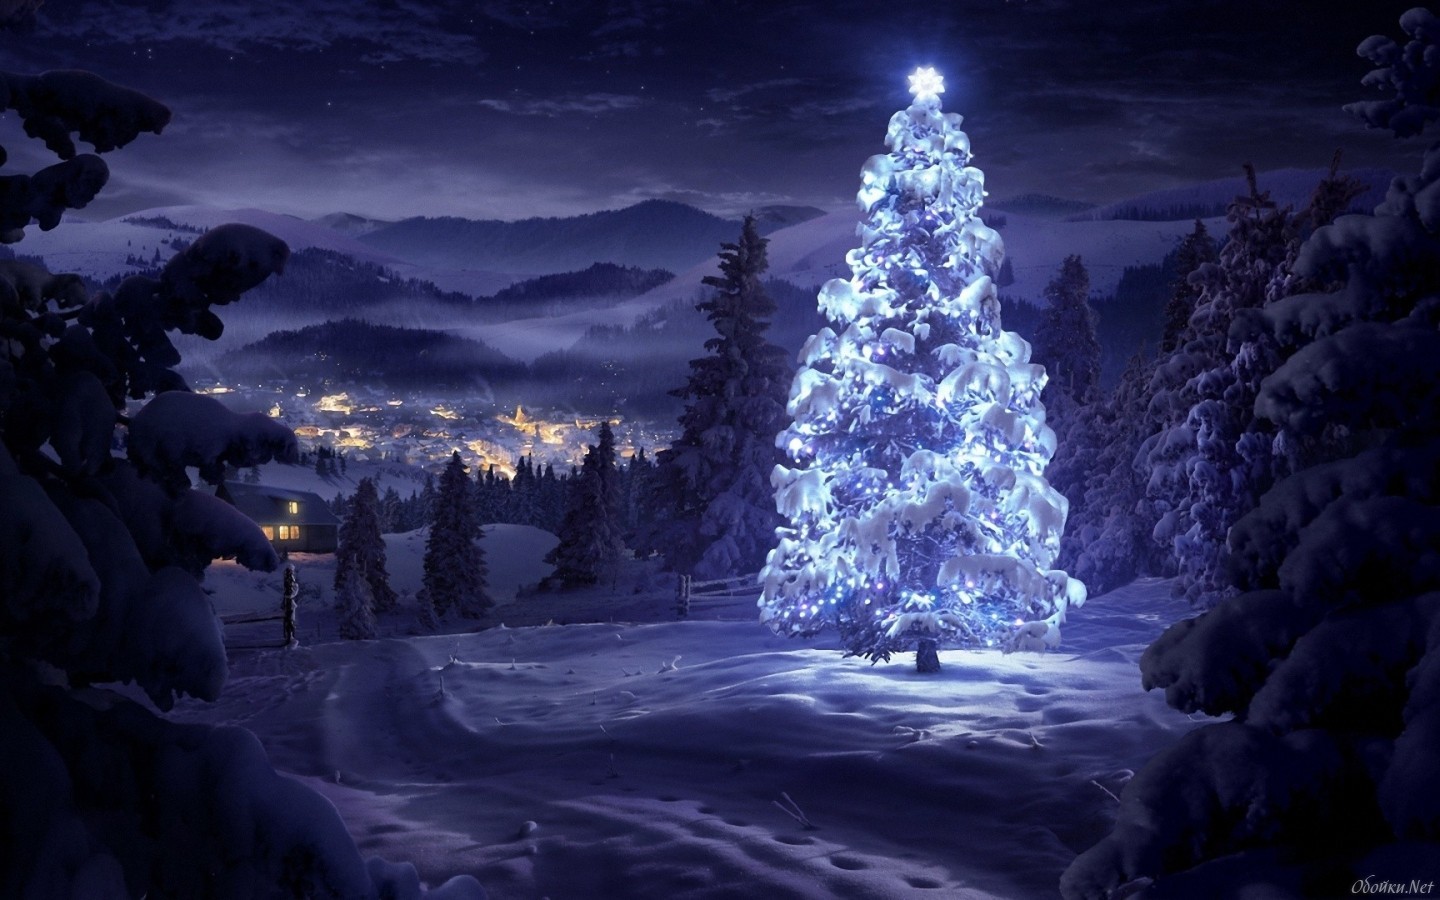 Download Christmas Xmas wallpaper for mobile phone, free Christmas Xmas HD picture